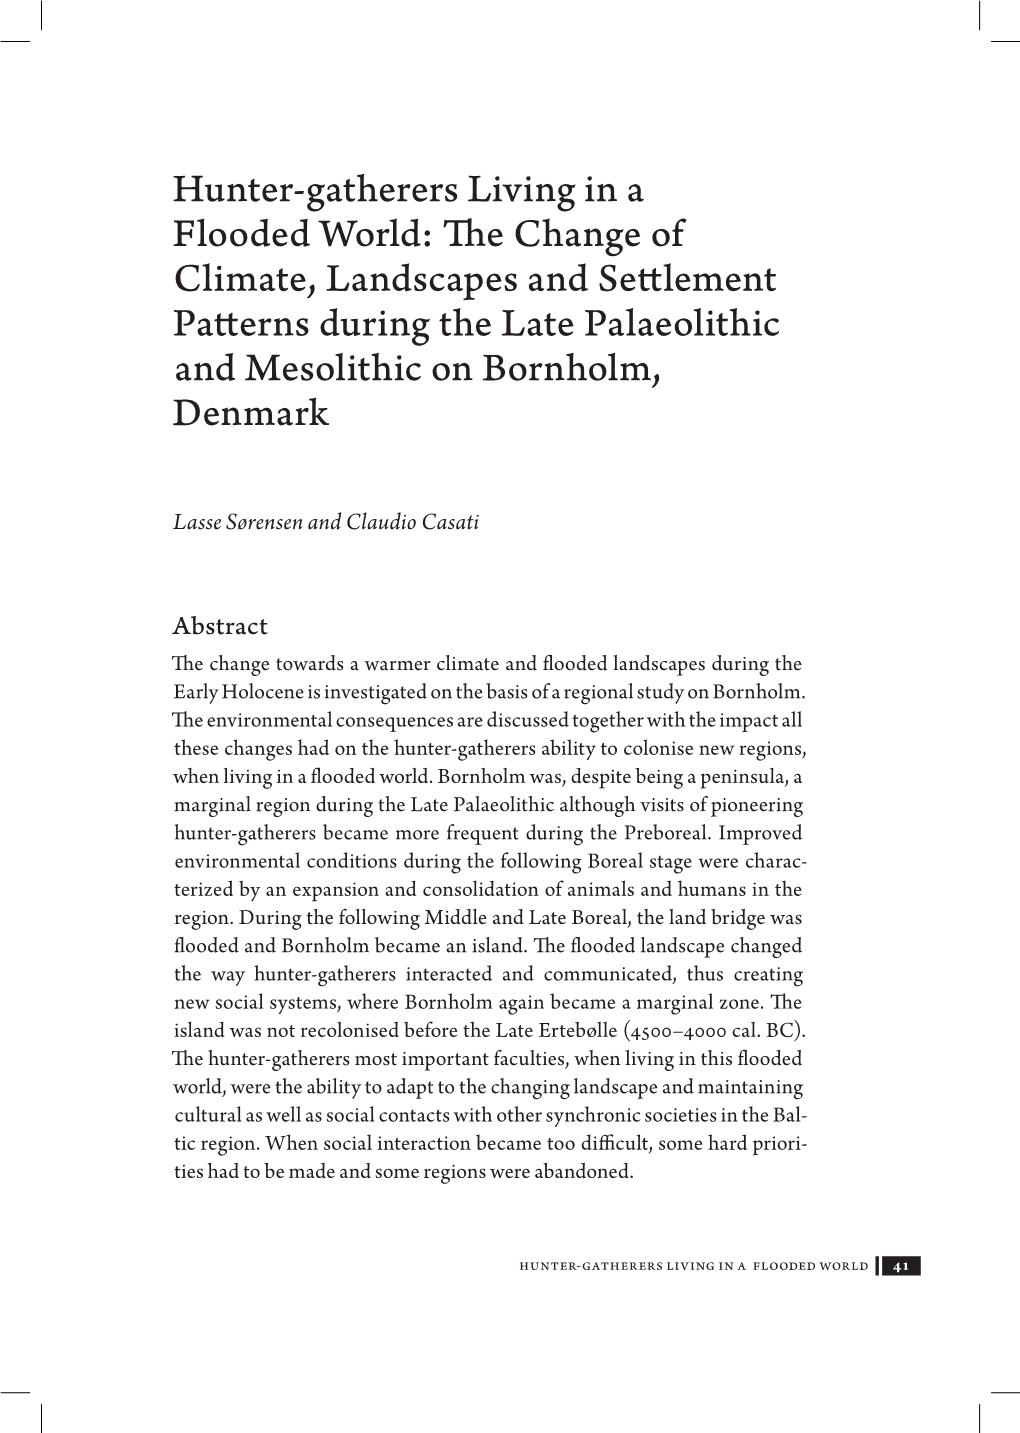 Hunter-Gatherers Living in a Flooded World: the Change of Climate, Landscapes and Settlement Patterns During the Late Palaeolithic and Mesolithic on Bornholm, Denmark